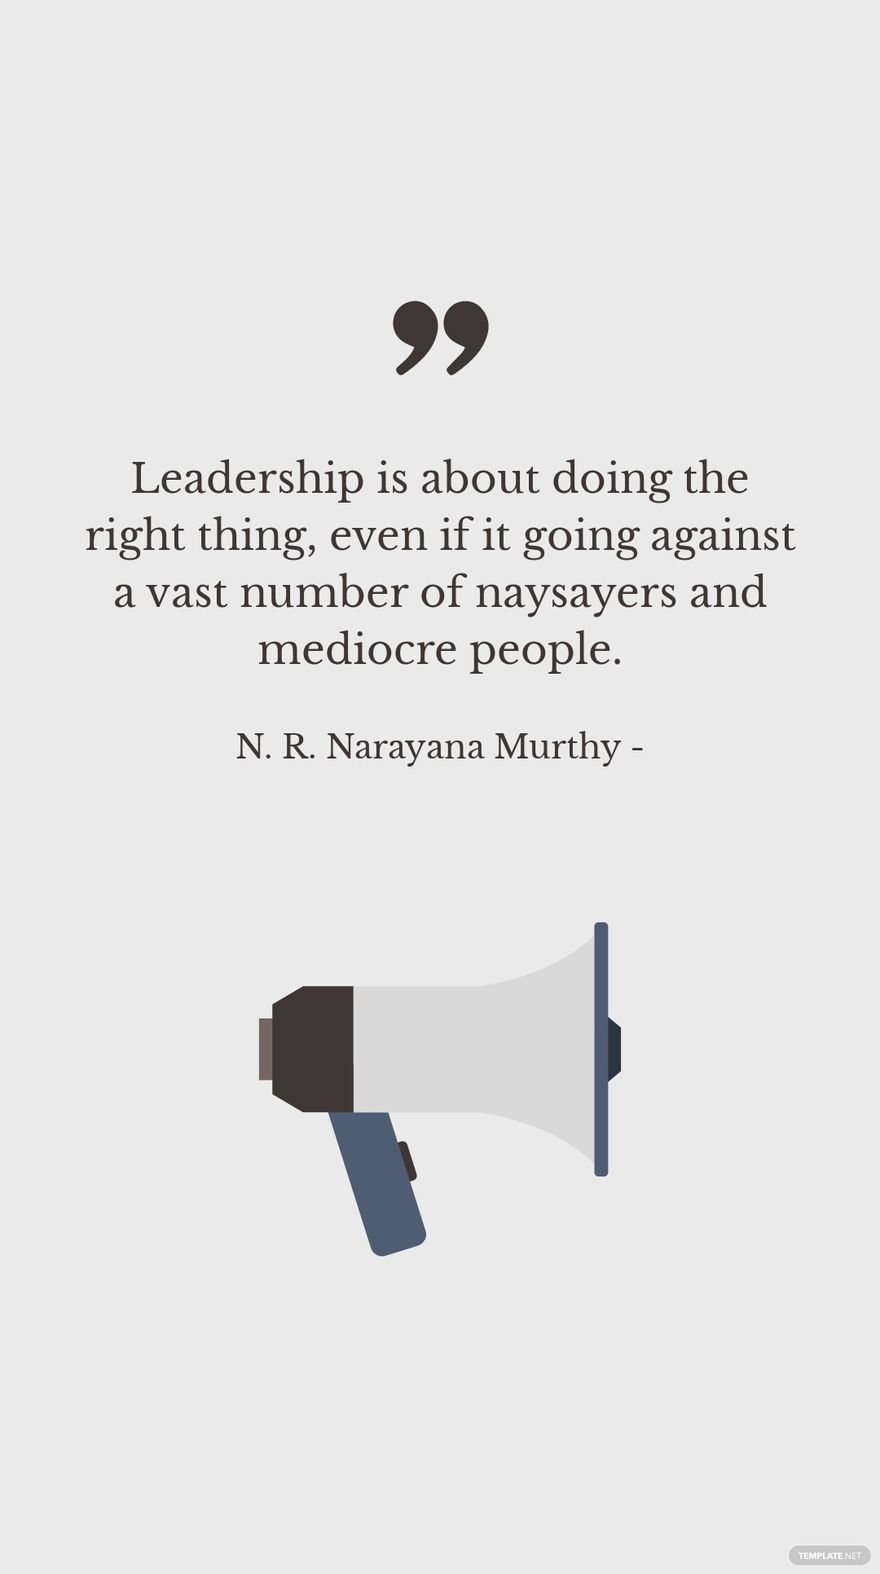 N. R. Narayana Murthy - Leadership is about doing the right thing, even if it going against a vast number of naysayers and mediocre people.